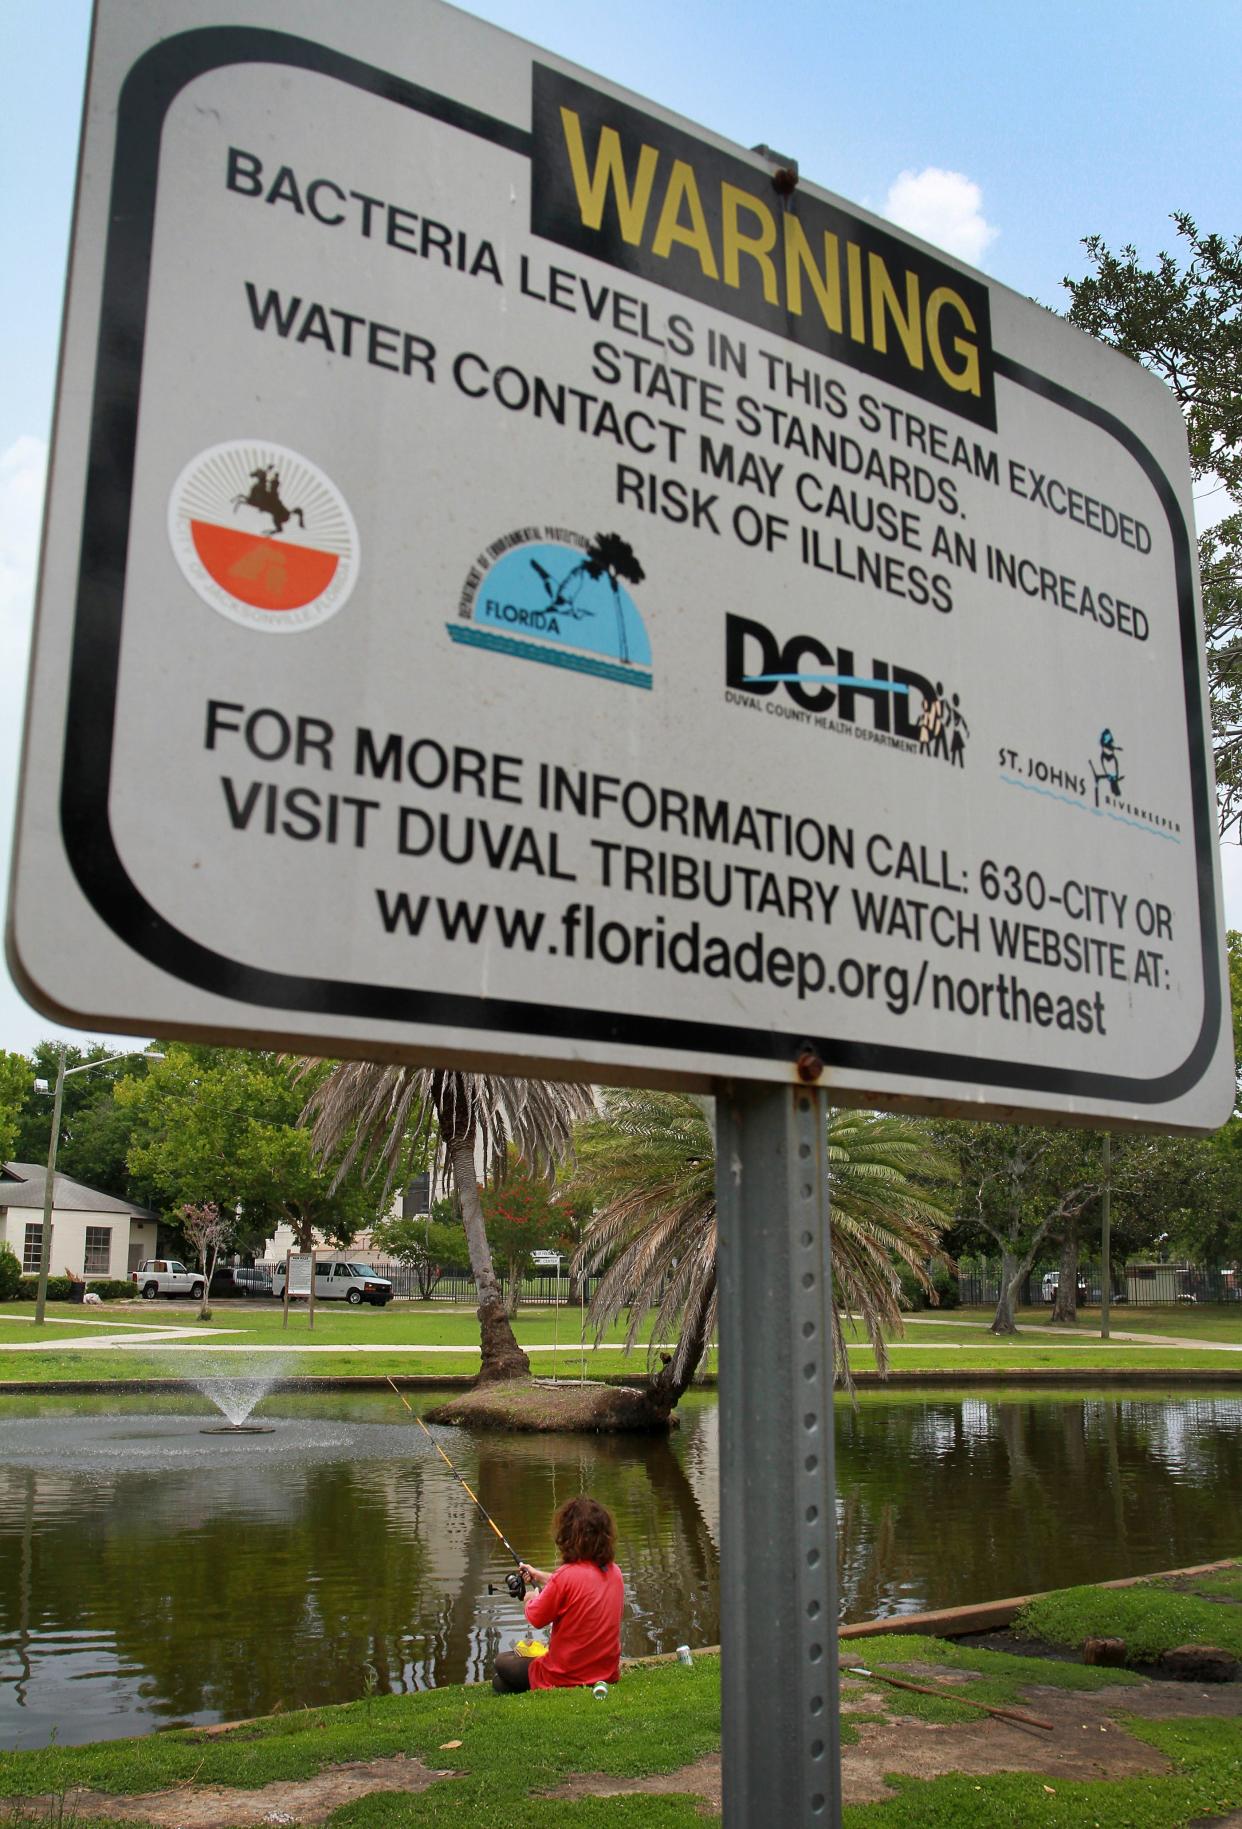 A sign at Jacksonville's Springfield Park warns against bacteria levels in Hogans Creek in this 2011 photo.